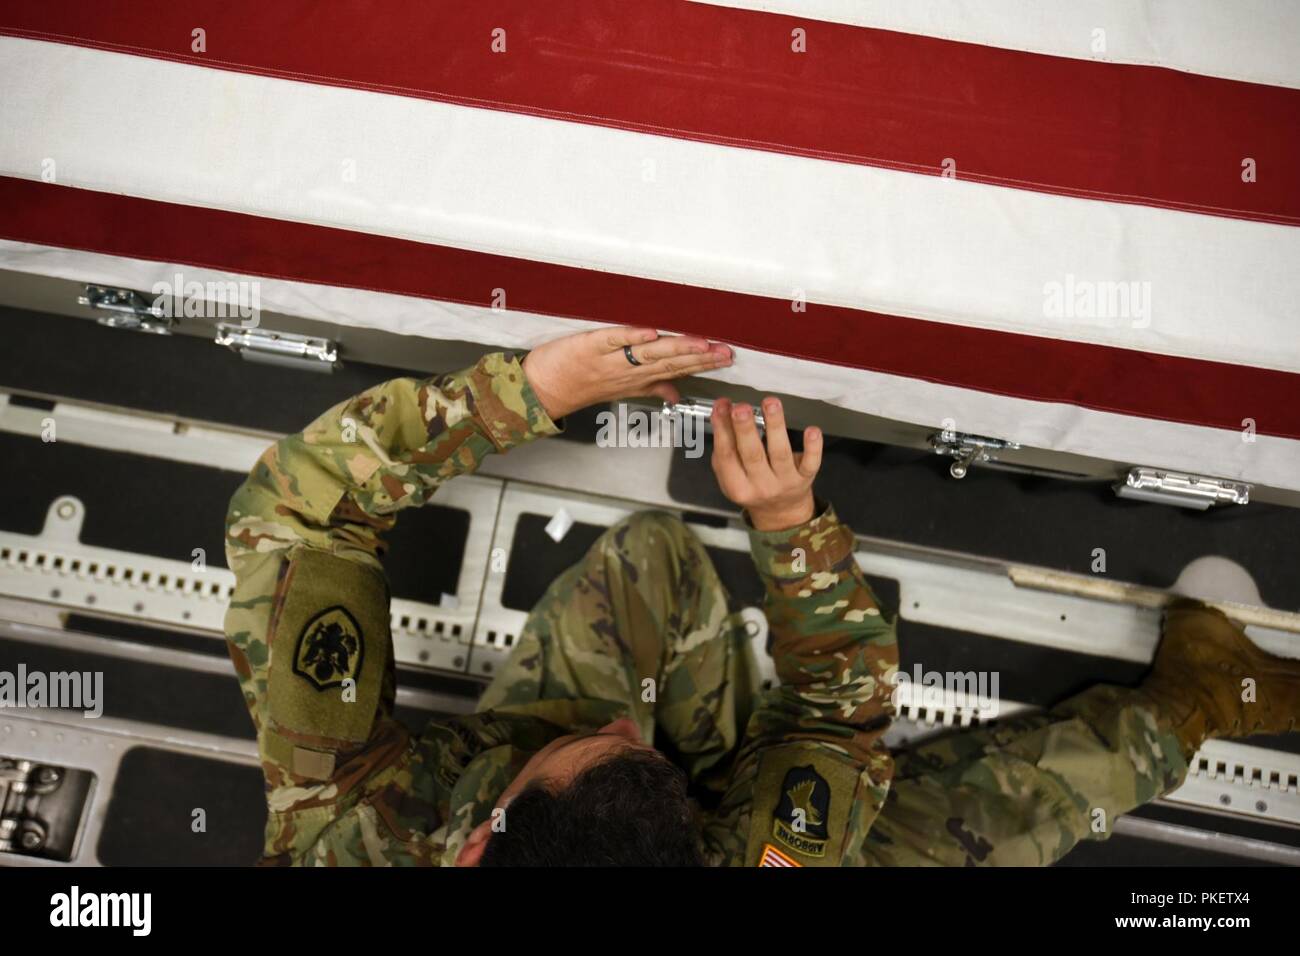 U.S. Army Staff Sgt. Marc Weyrick, mortuary affairs specialist assigned to the Defense POW/MIA Accounting Agency (DPAA), secures a U.S. flag onto a transfer case aboard an Air Force C-17 Globemaster III en route to Joint Base Pearl Harbor-Hickam, Hawaii, from Osan Air Base, Republic of Korea, Aug. 1, 2018. The cases contain possible remains of service members lost during the Korean War and were transferred to DPAA's forensic laboratory in Hawaii to begin the identification process in support of the agency's mission to provide the fullest possible accounting of our missing to their families and Stock Photo